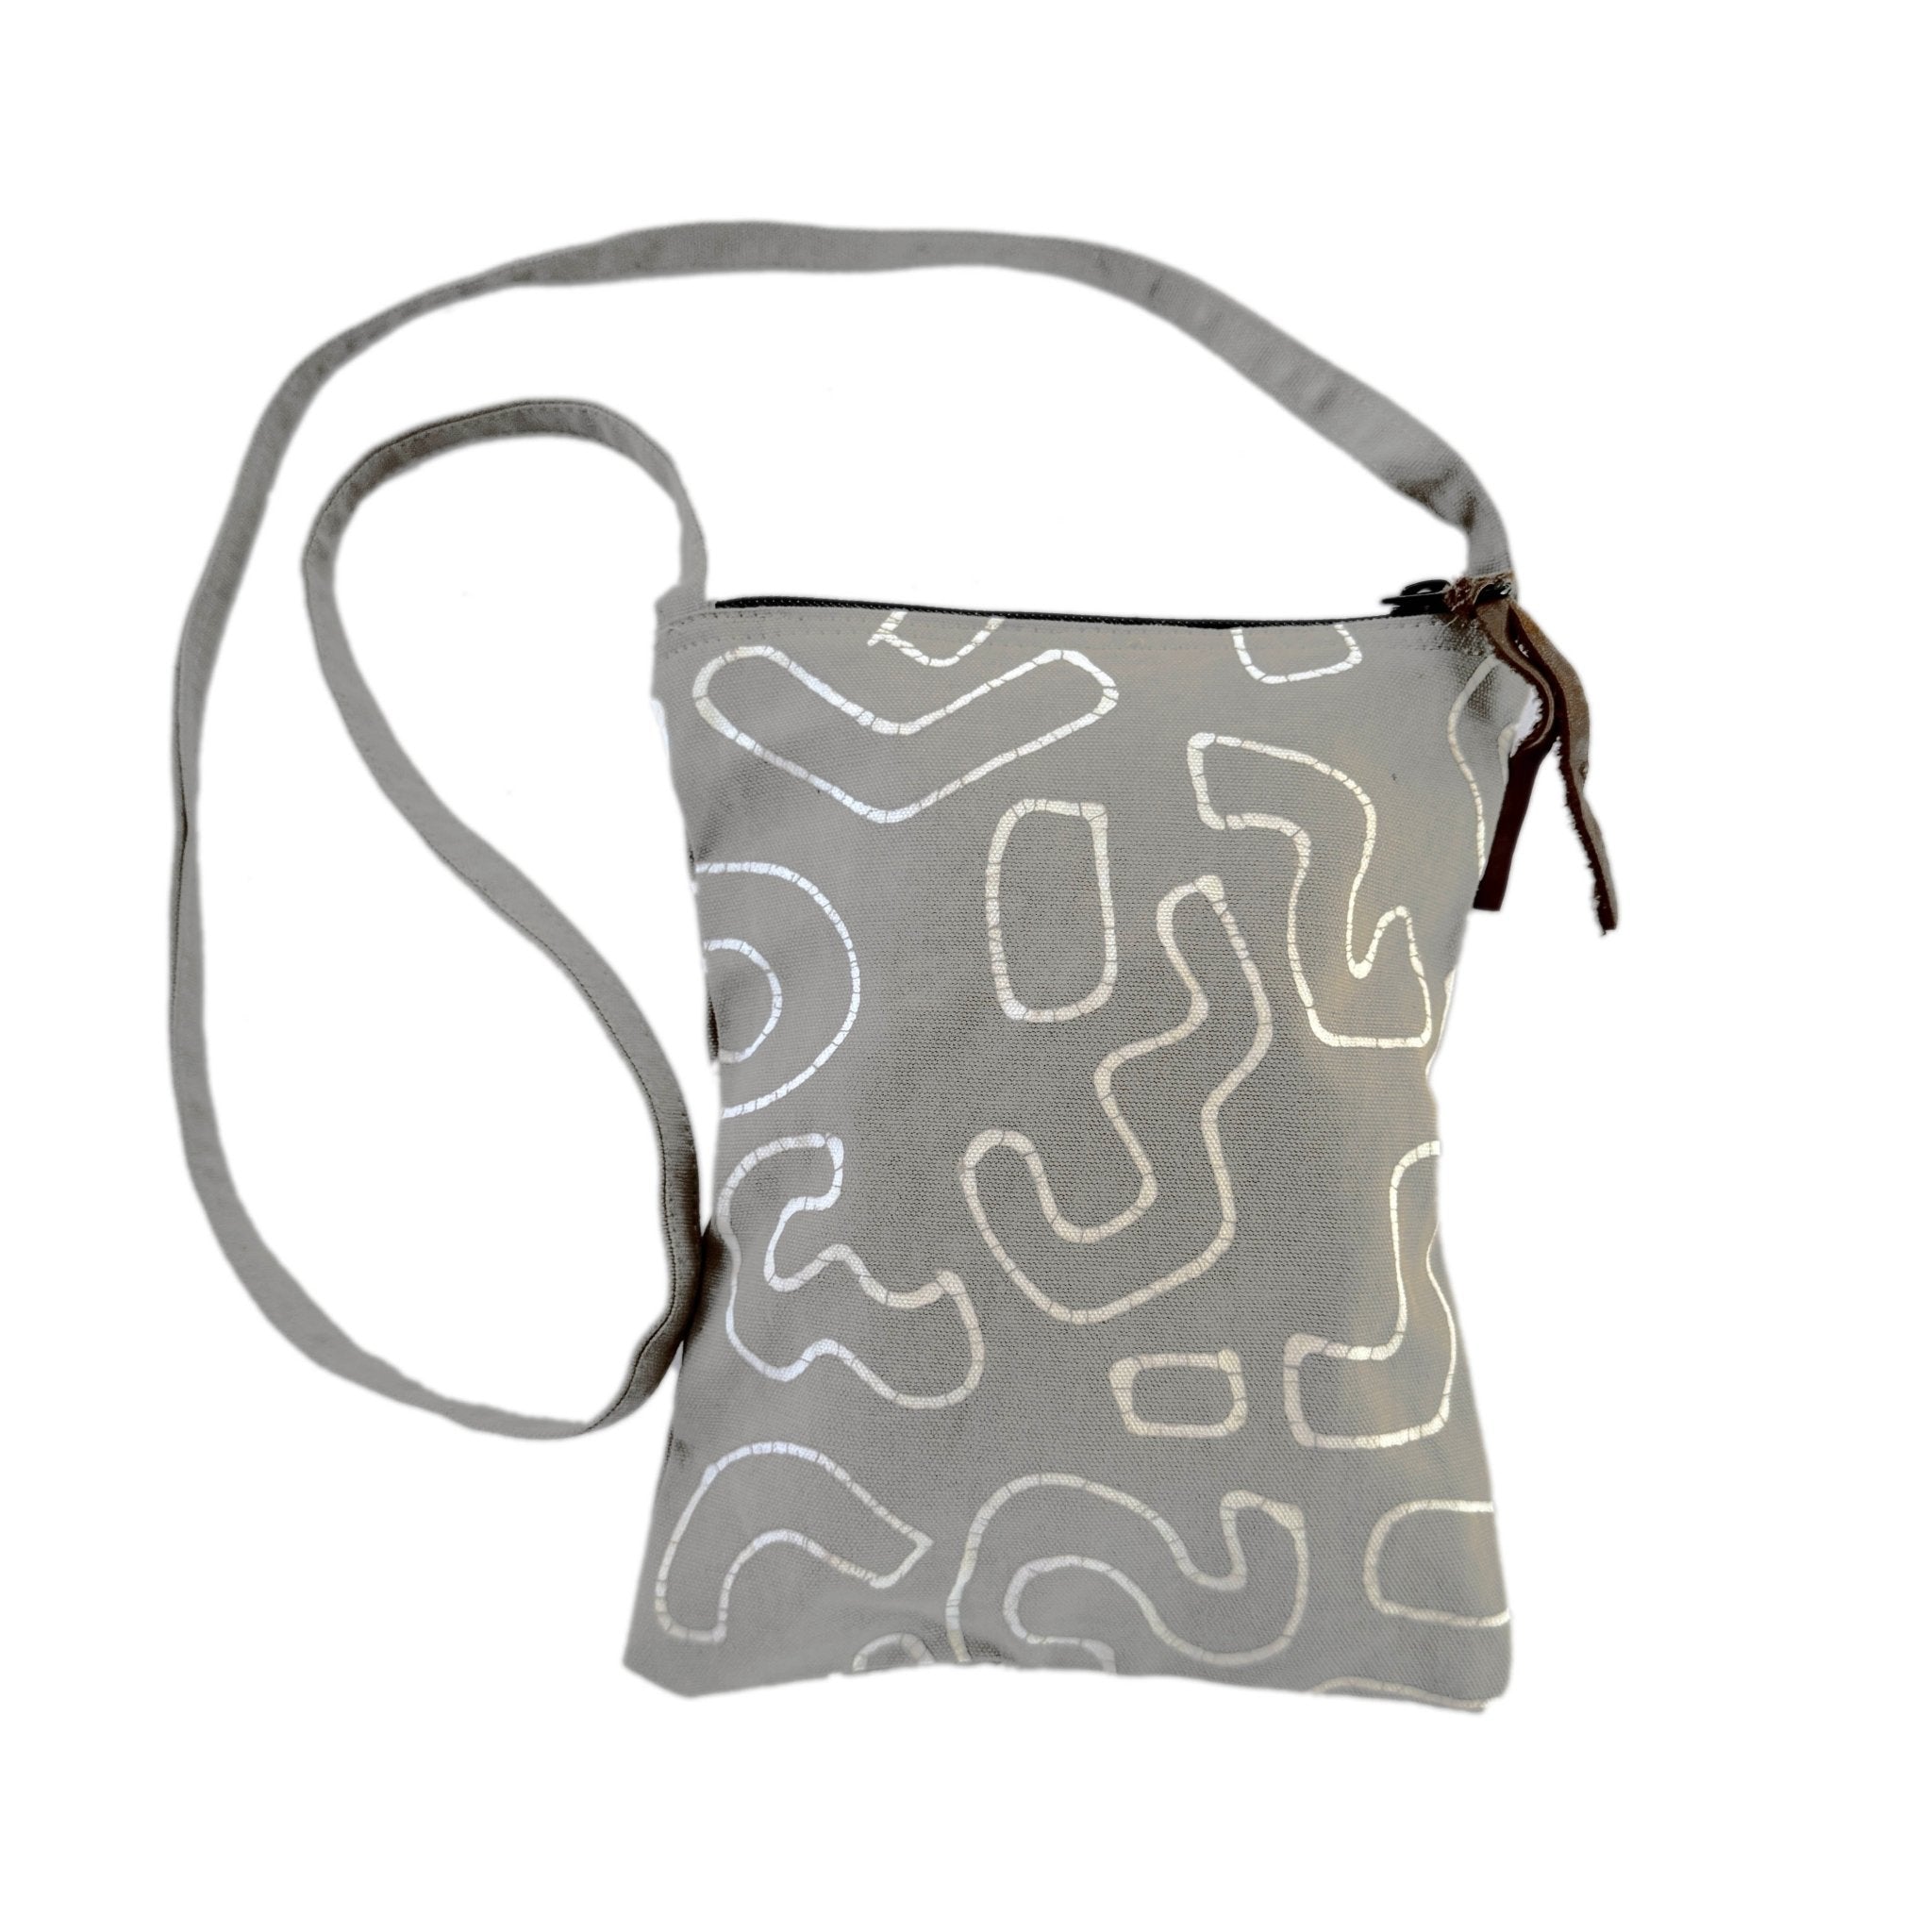 Kuba Outline Light Taupe Passport Bag - Handmade by TRIBAL TEXTILES - Handcrafted Home Decor Interiors - African Made